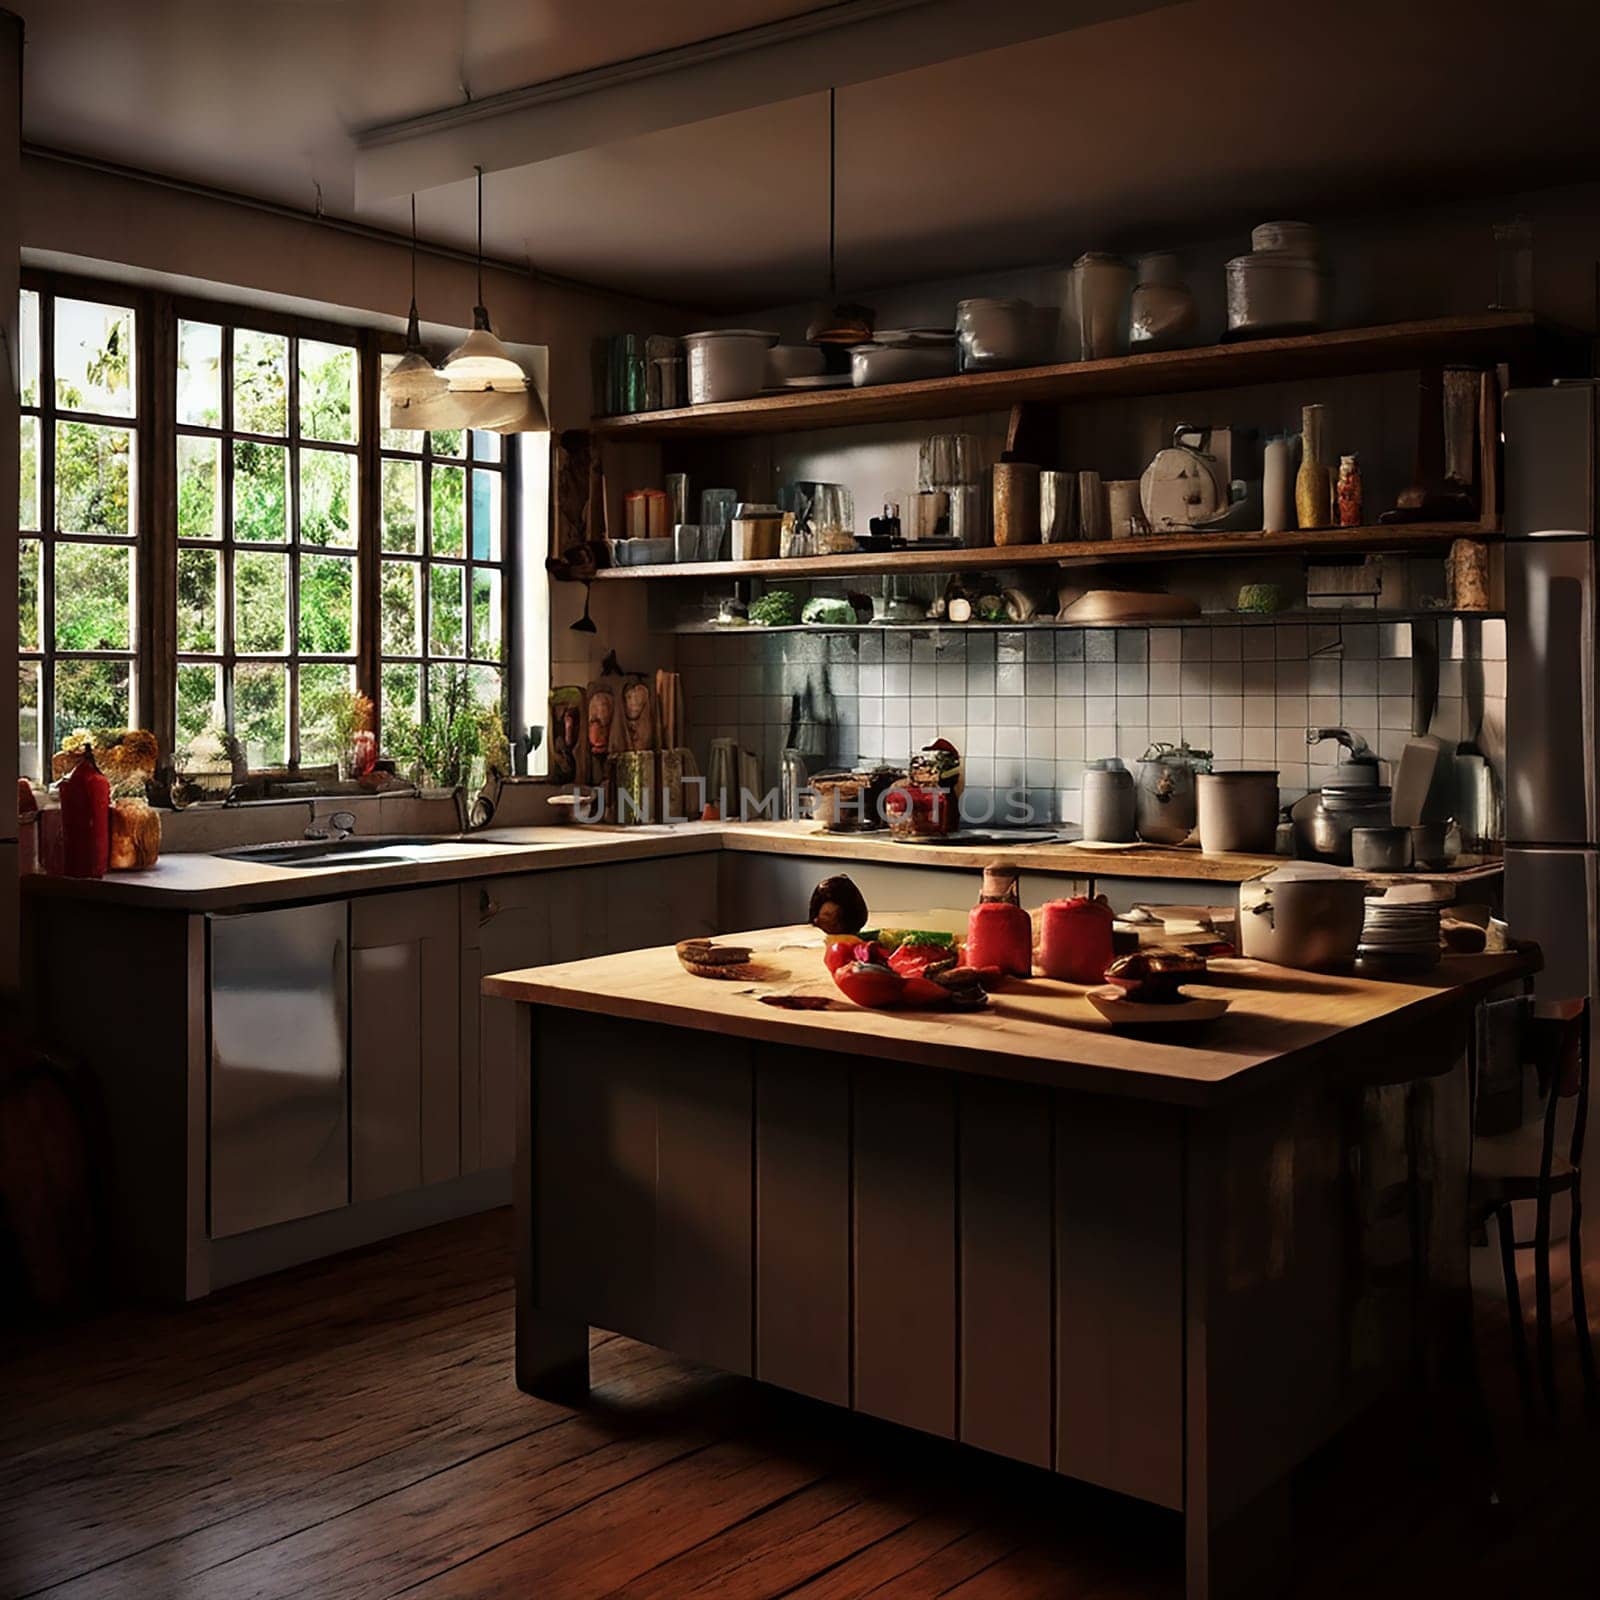 The Beauty of Wood in Kitchen Interior Design by Petrichor